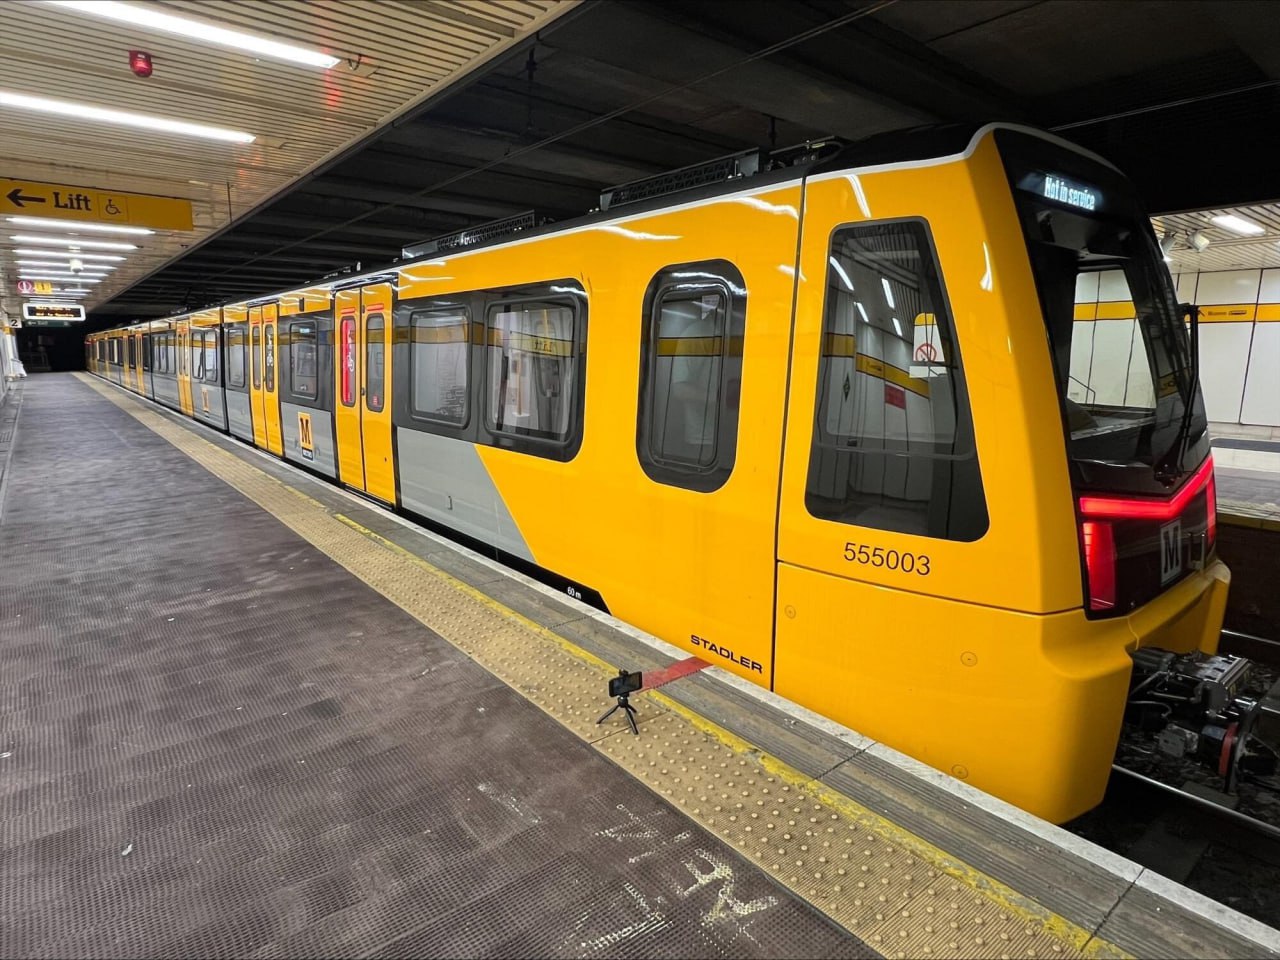 The 555 Class train for the Tyne and Wear Metro by Stadler